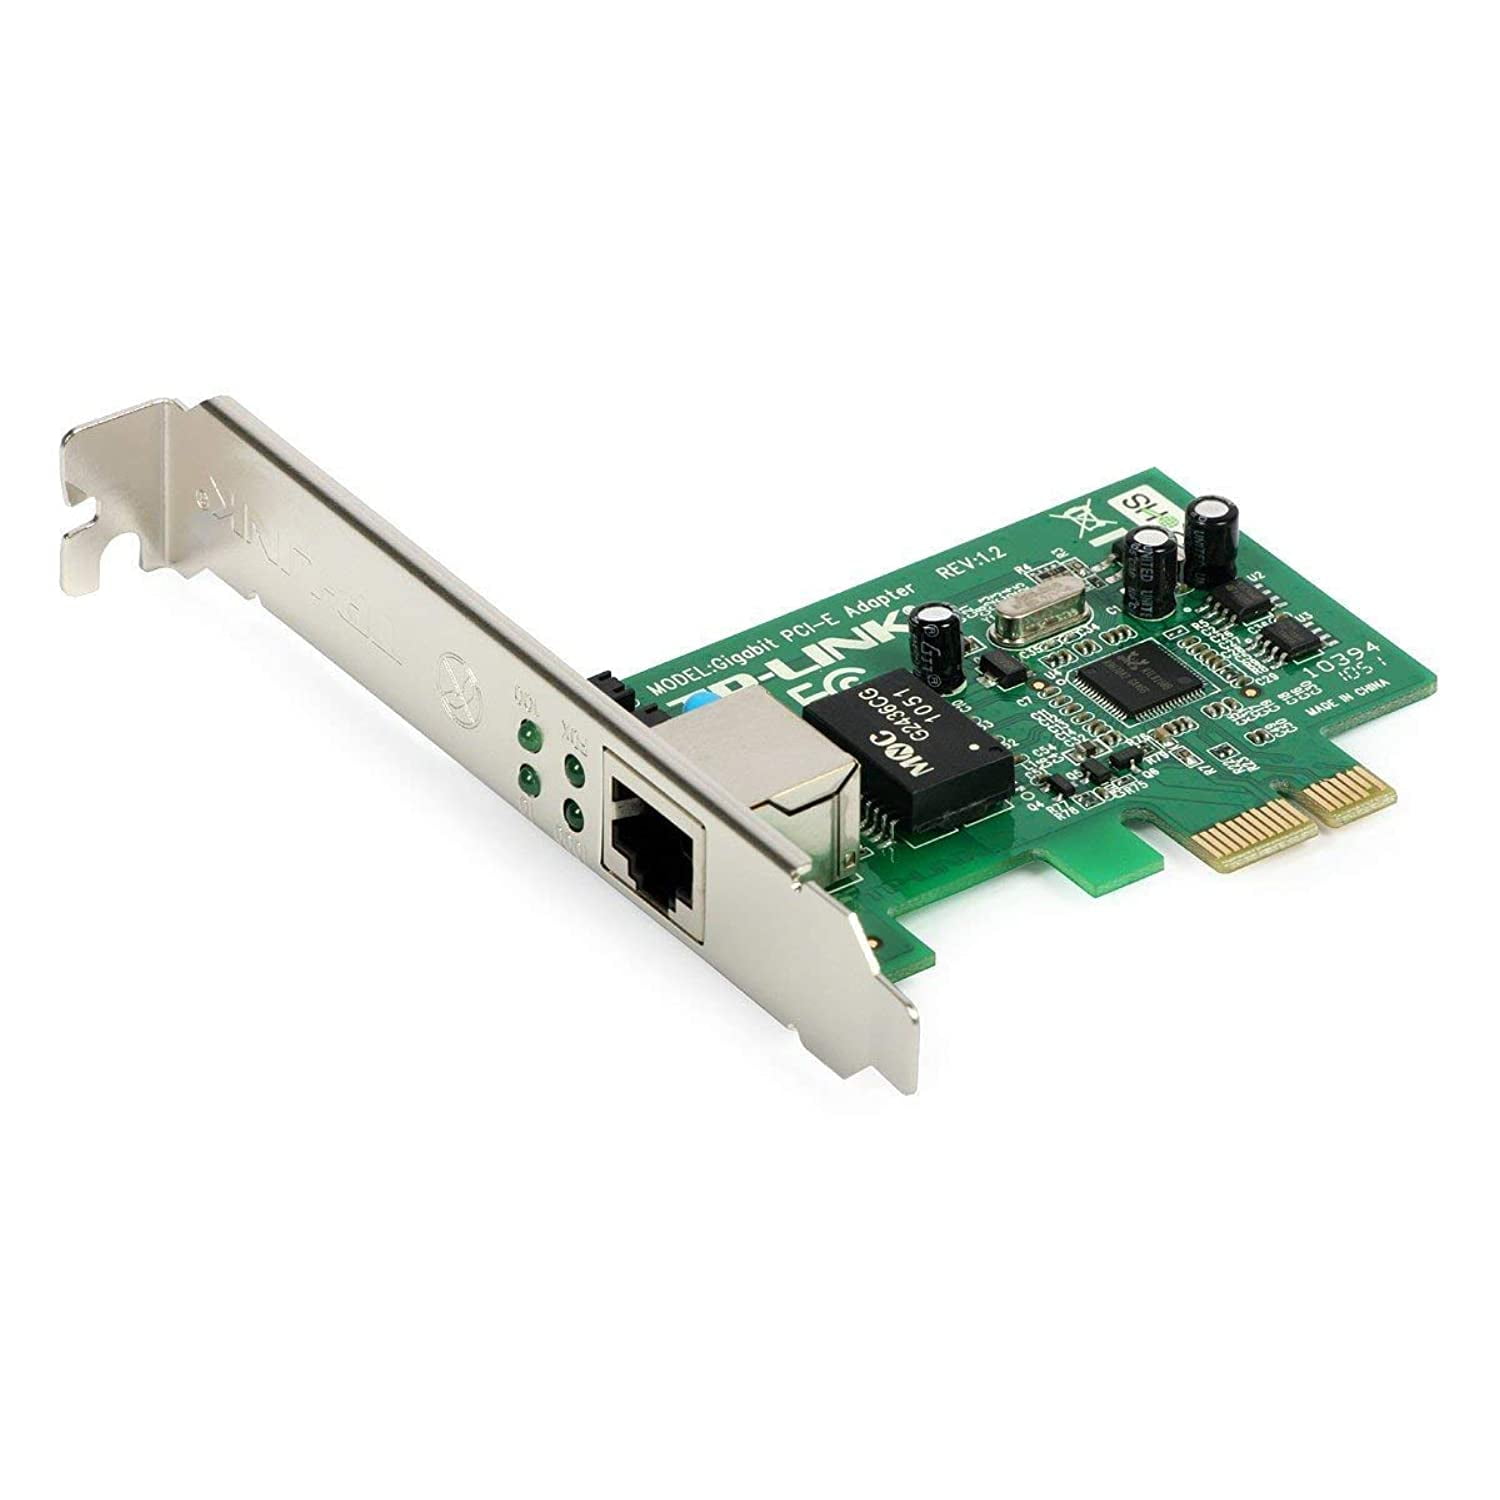 rivaal Implementeren In TP-Link 10/100/1000Mbps Gigabit Ethernet PCI Express, PCIE Network Adapter  / Network Card / Ethernet Card for PC, Win10 supported (TG-3468) -  Walmart.com